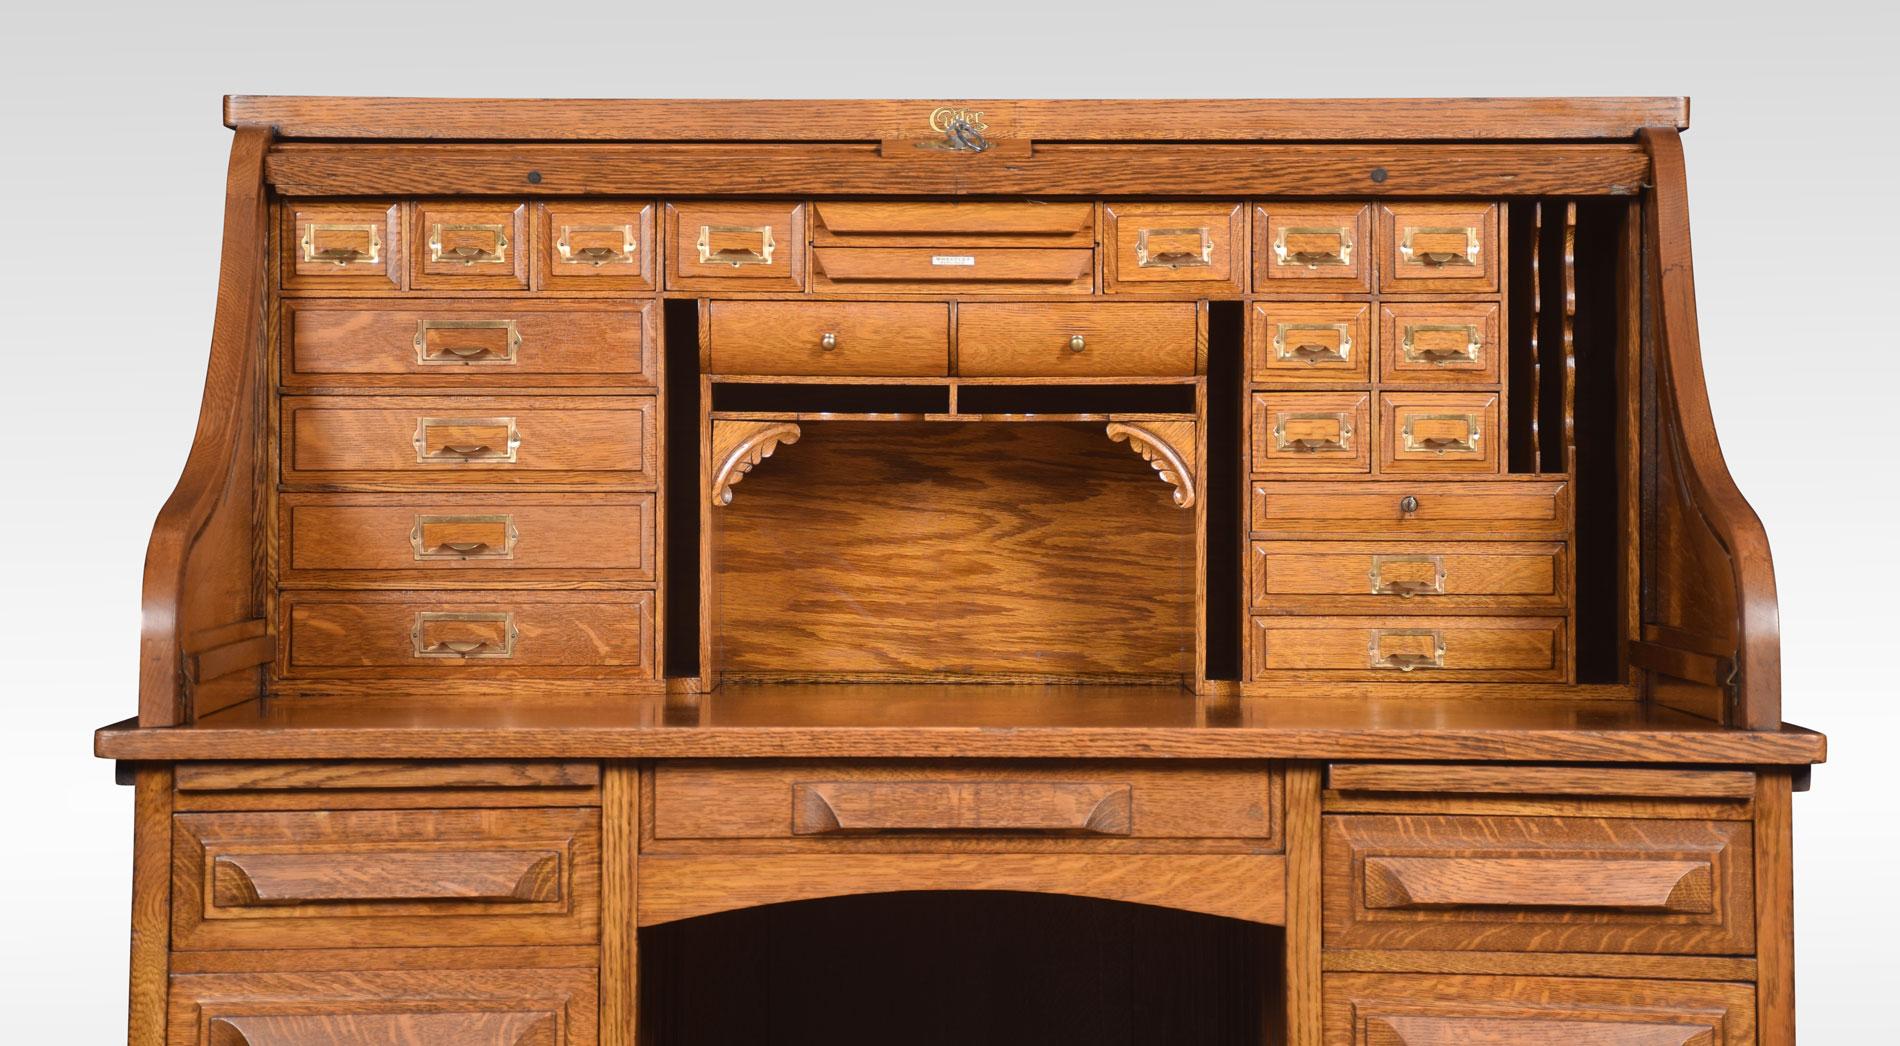 Oak double pedestal roll-top desk, the high back with the fitted interior of pigeon holes and drawers, the centre drawer flanked by pedestals having brush in slide above three short drawers and one double drawer. All raised up on plinth base.